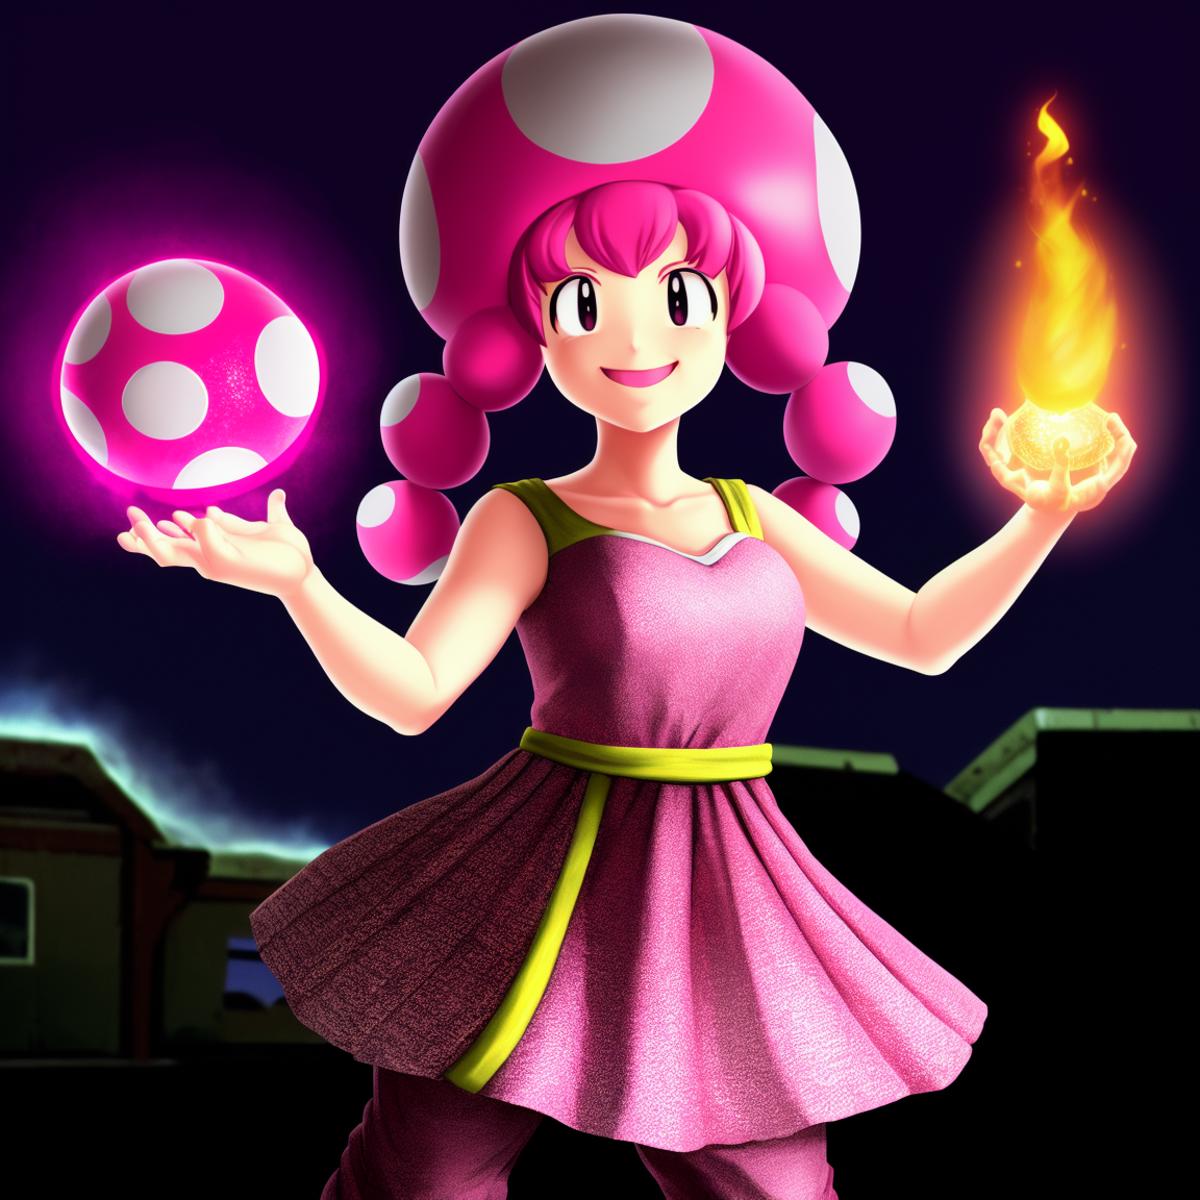 Toadette image by Mobbun